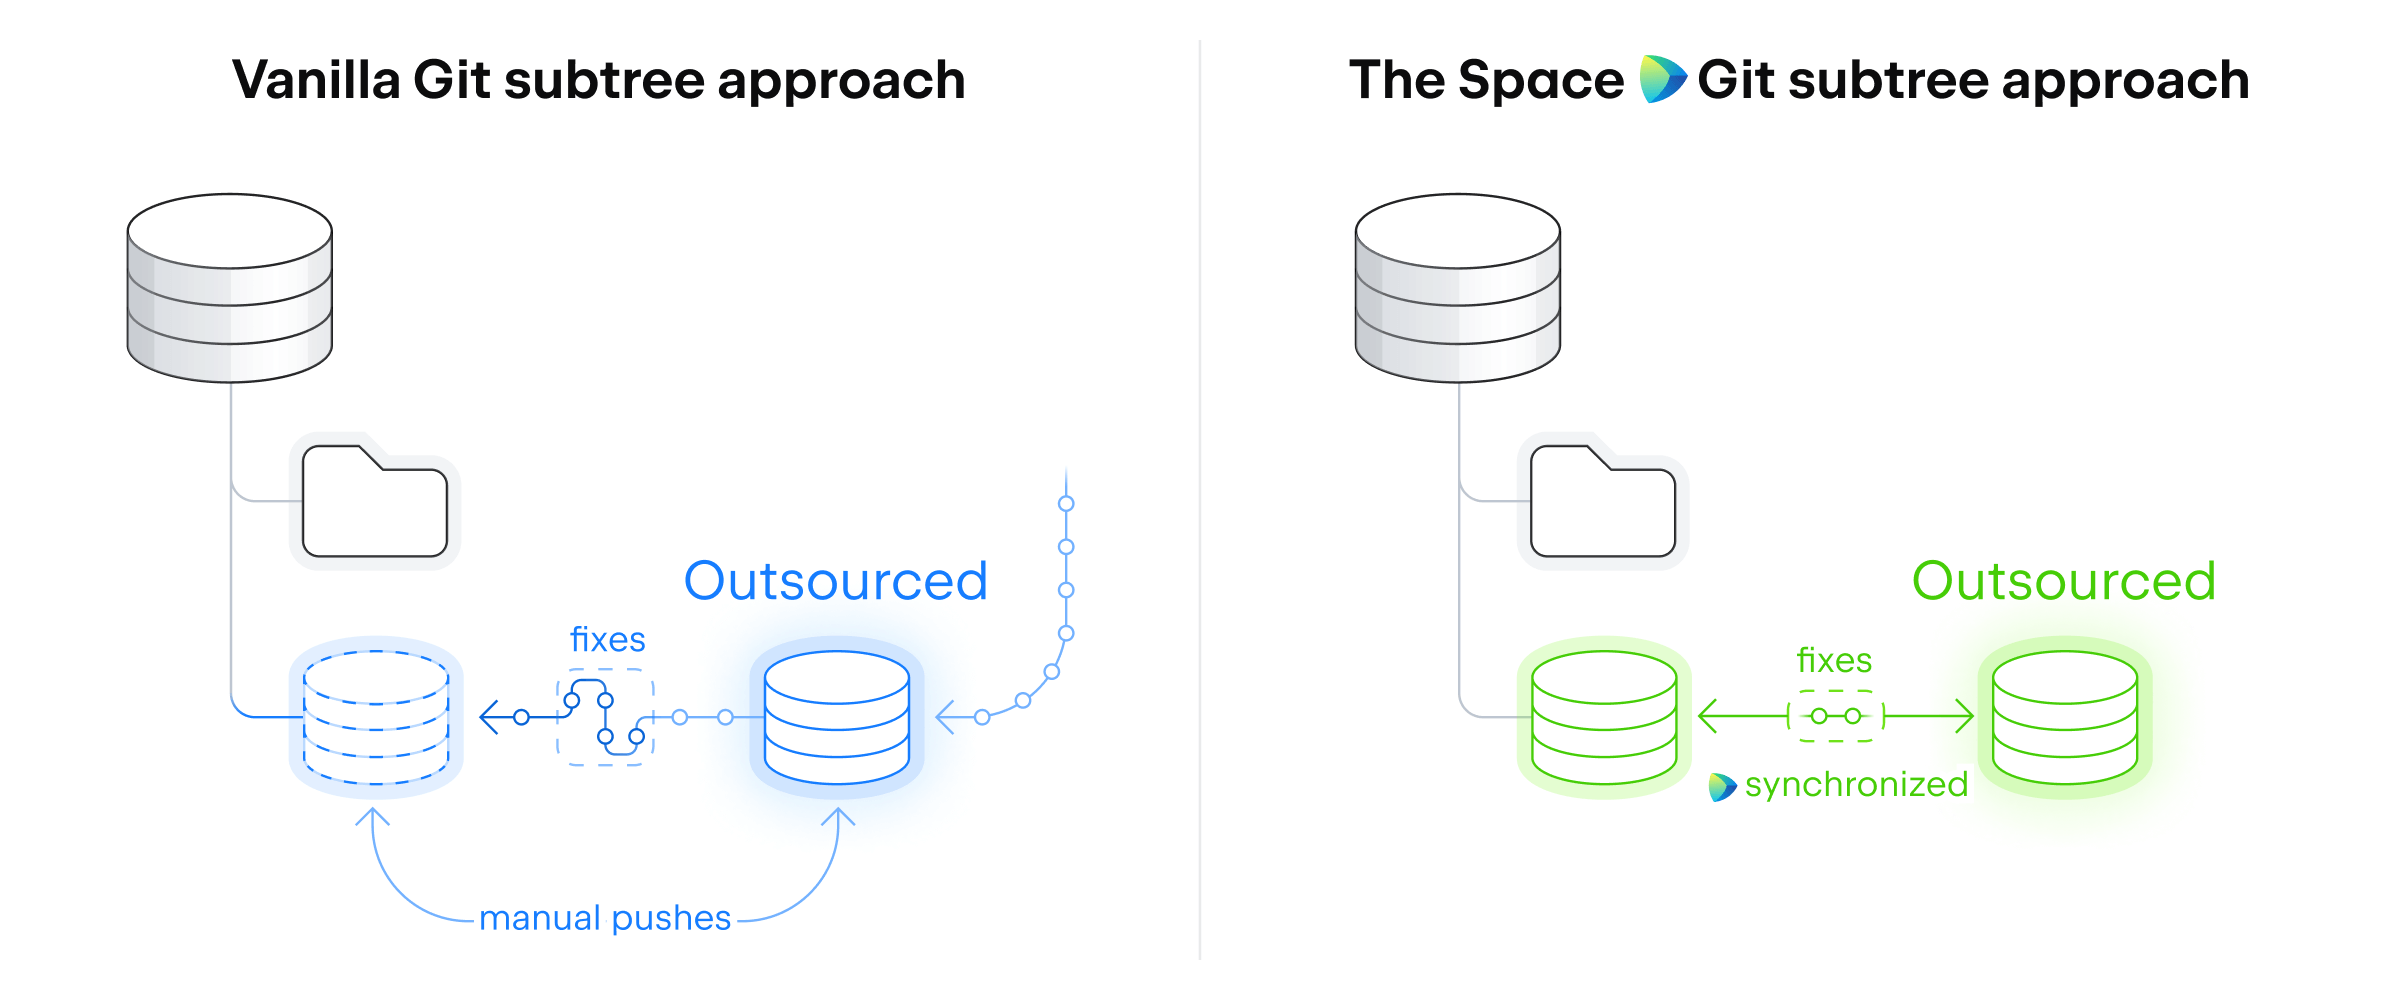 Diagram showcasing how a user would be doing the "Monorepo with an outsourced subtree" use case with the vanilla Git subtree and the improved Space Git subtree